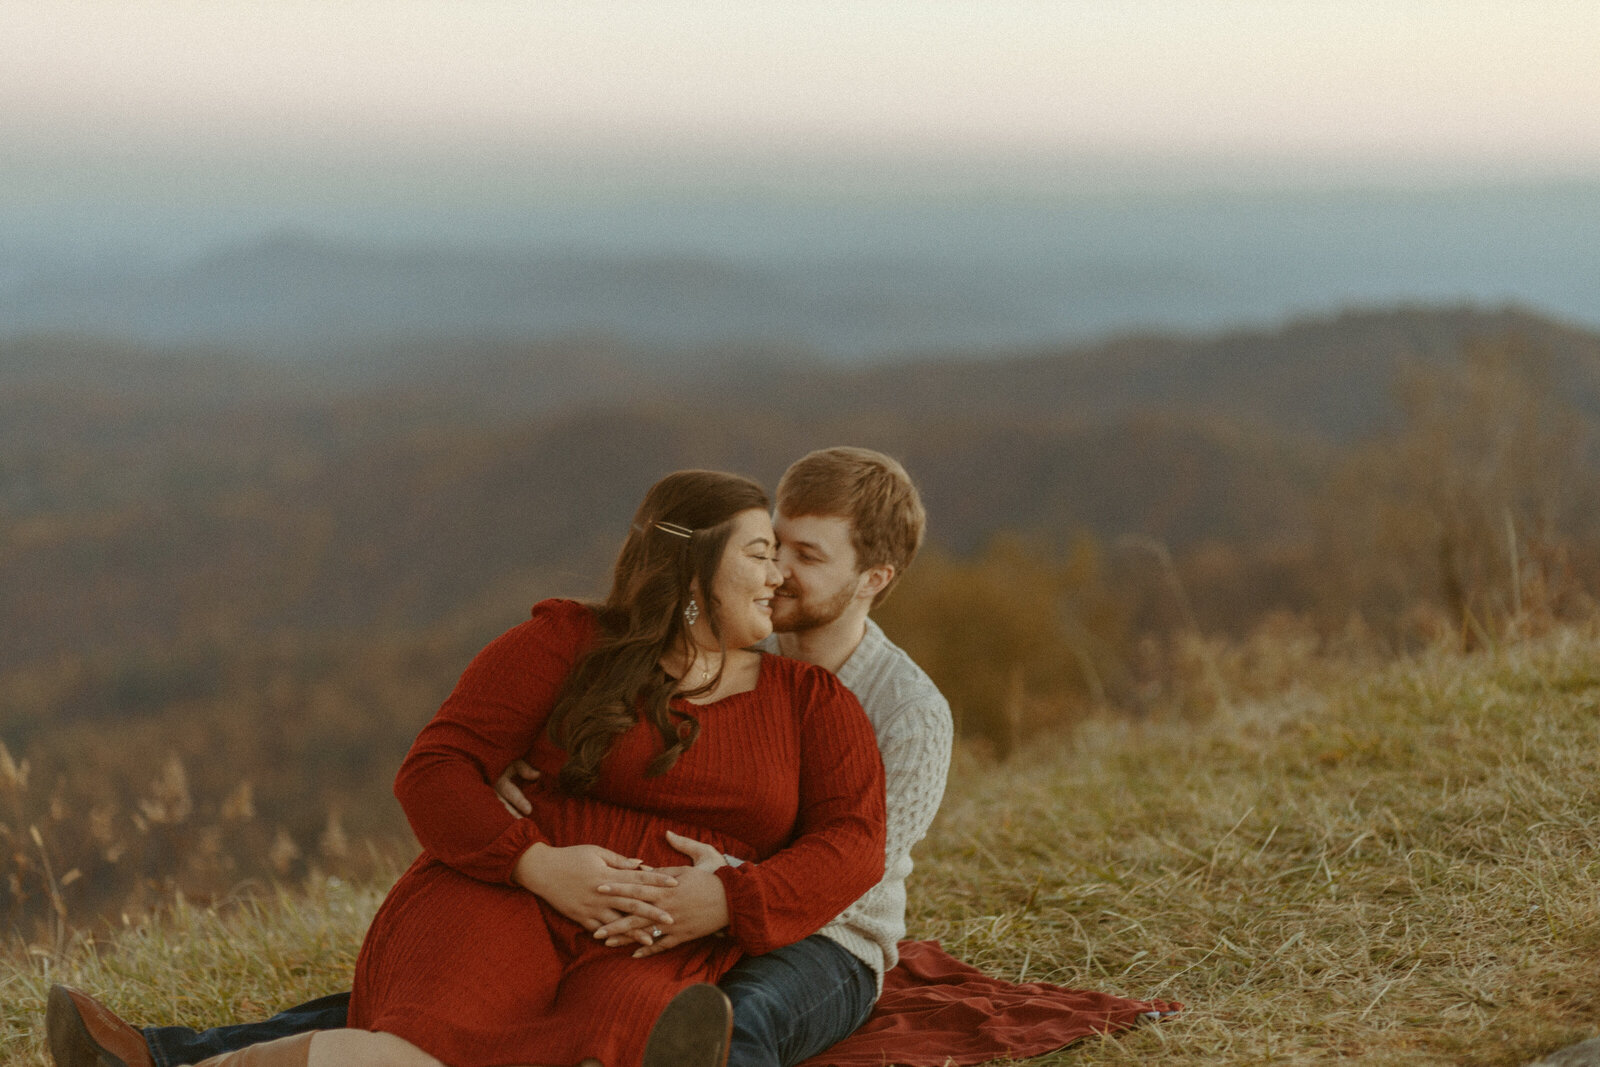 Mountains engagement session in Asheville, North Carolina